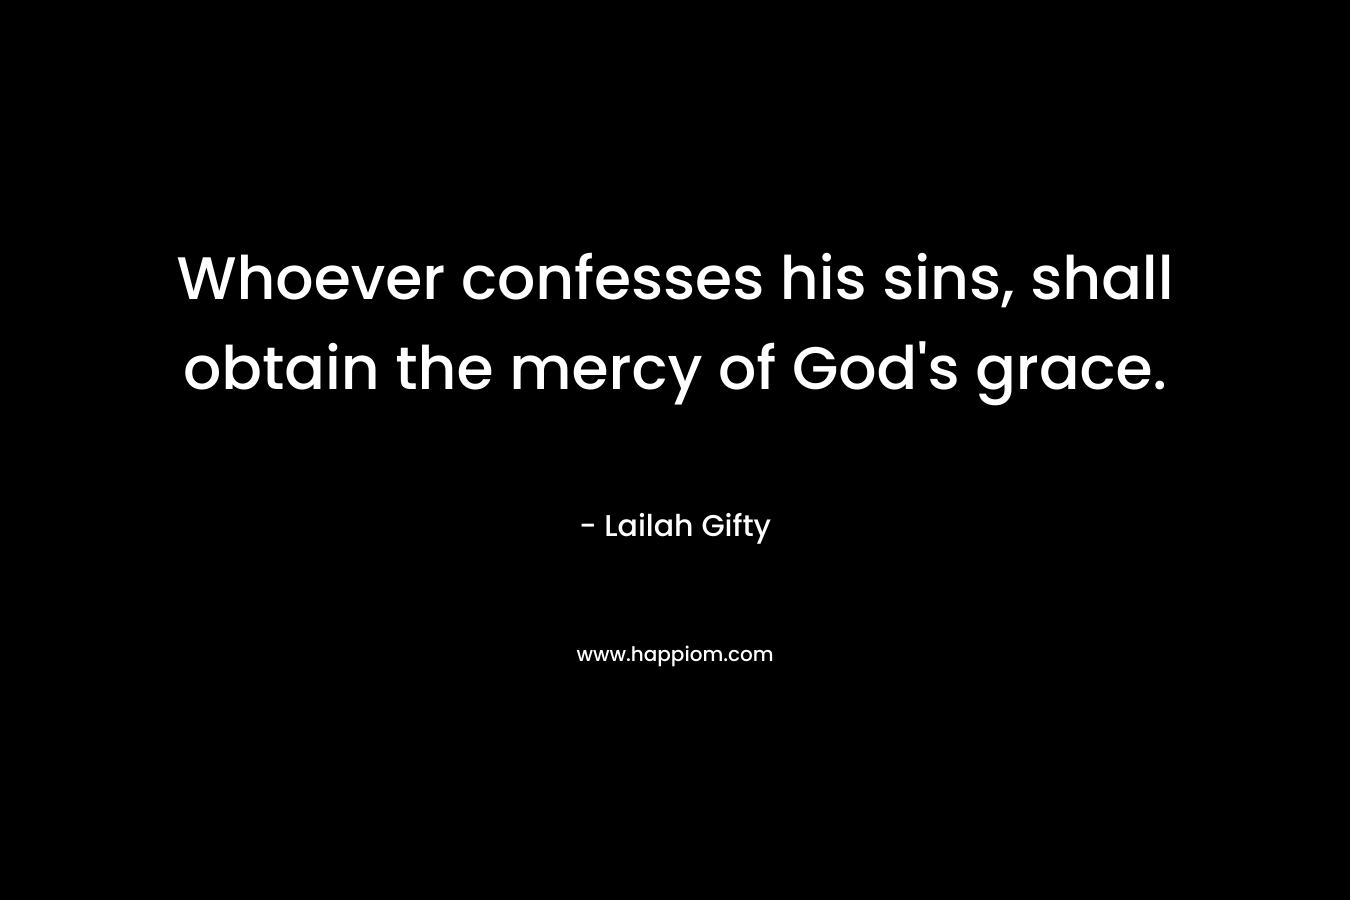 Whoever confesses his sins, shall obtain the mercy of God’s grace. – Lailah Gifty